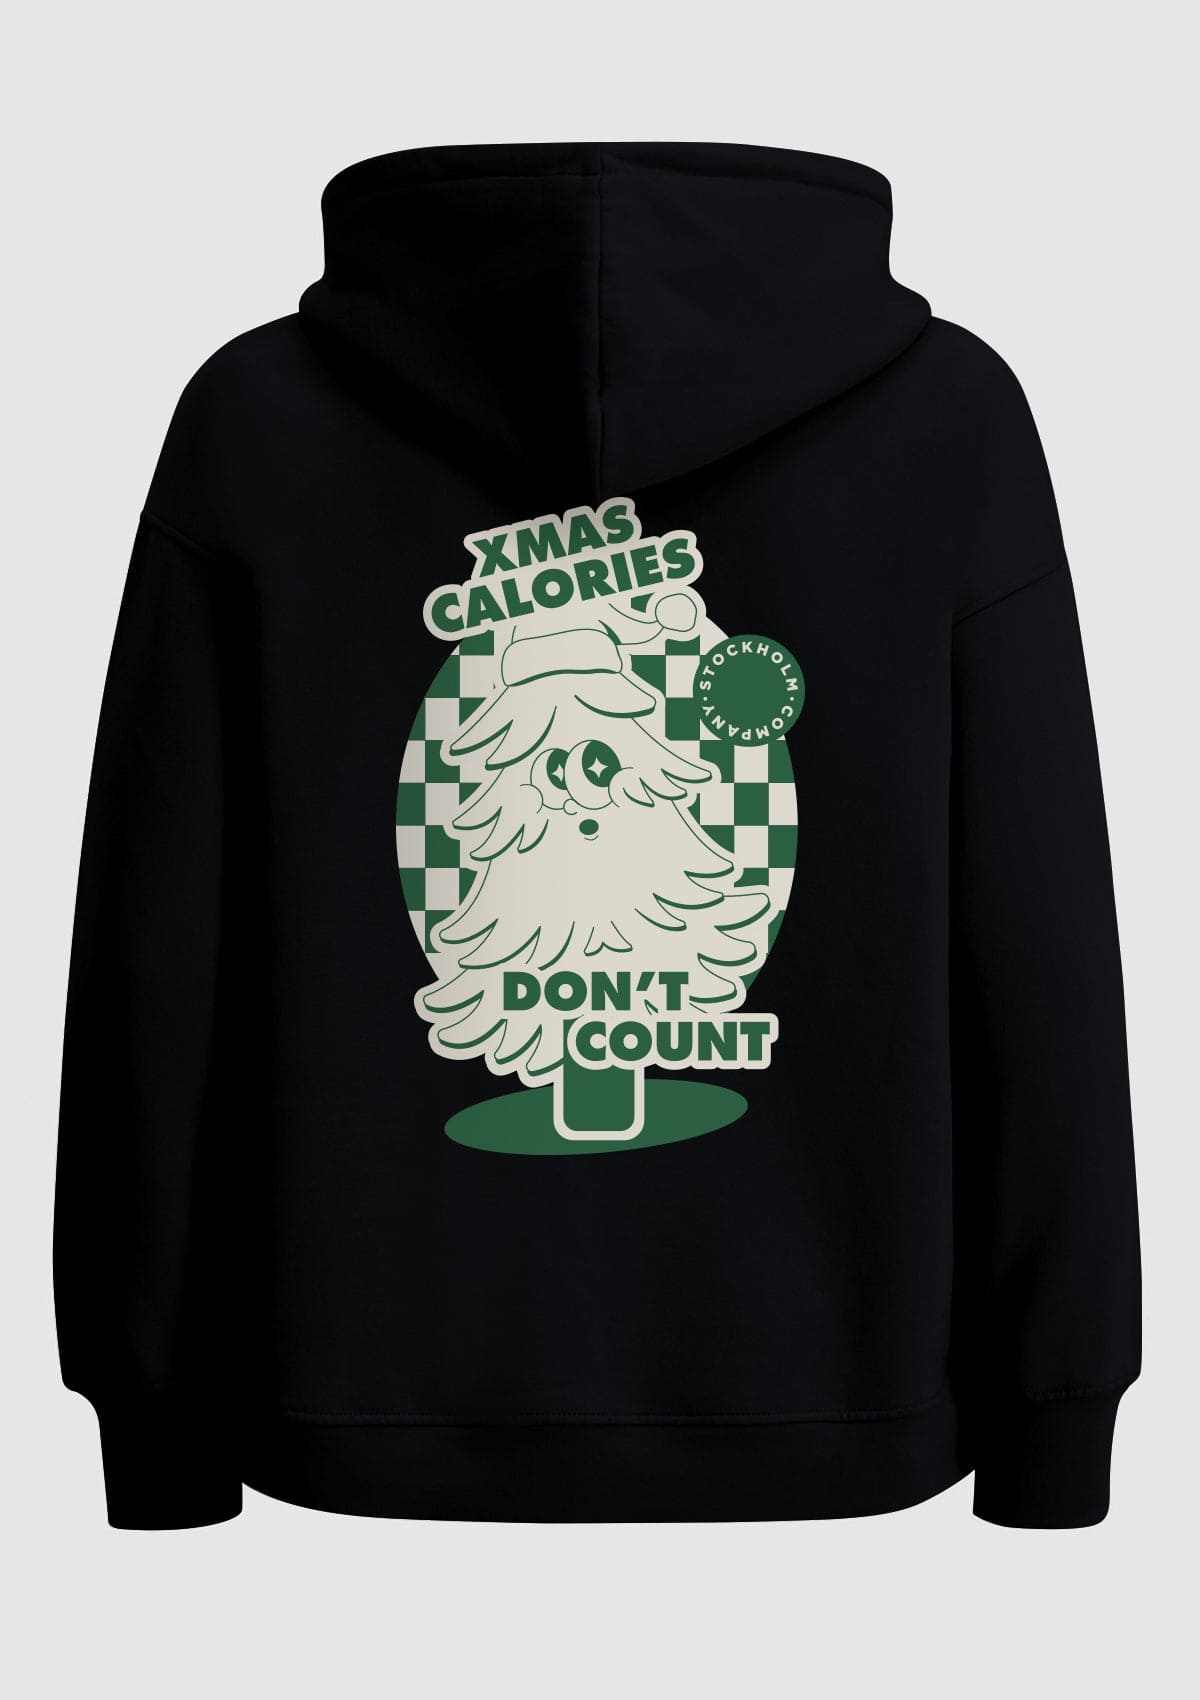 Don't Count Calories at Christmas - Hoodie